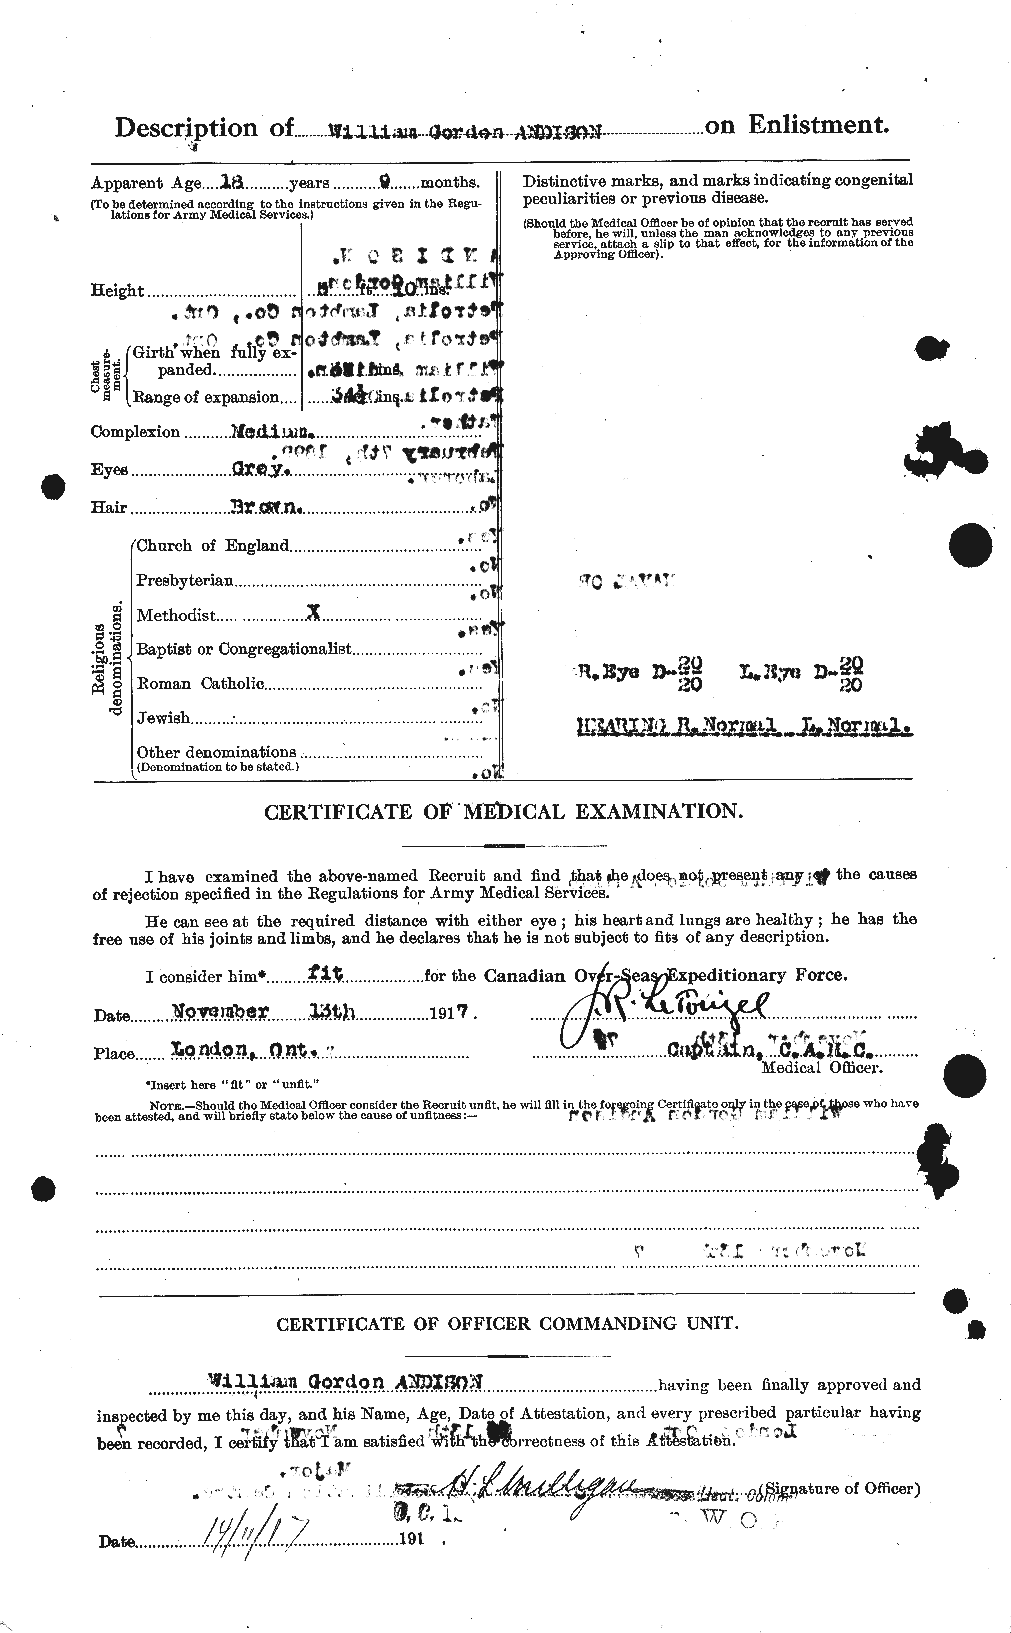 Personnel Records of the First World War - CEF 210636b